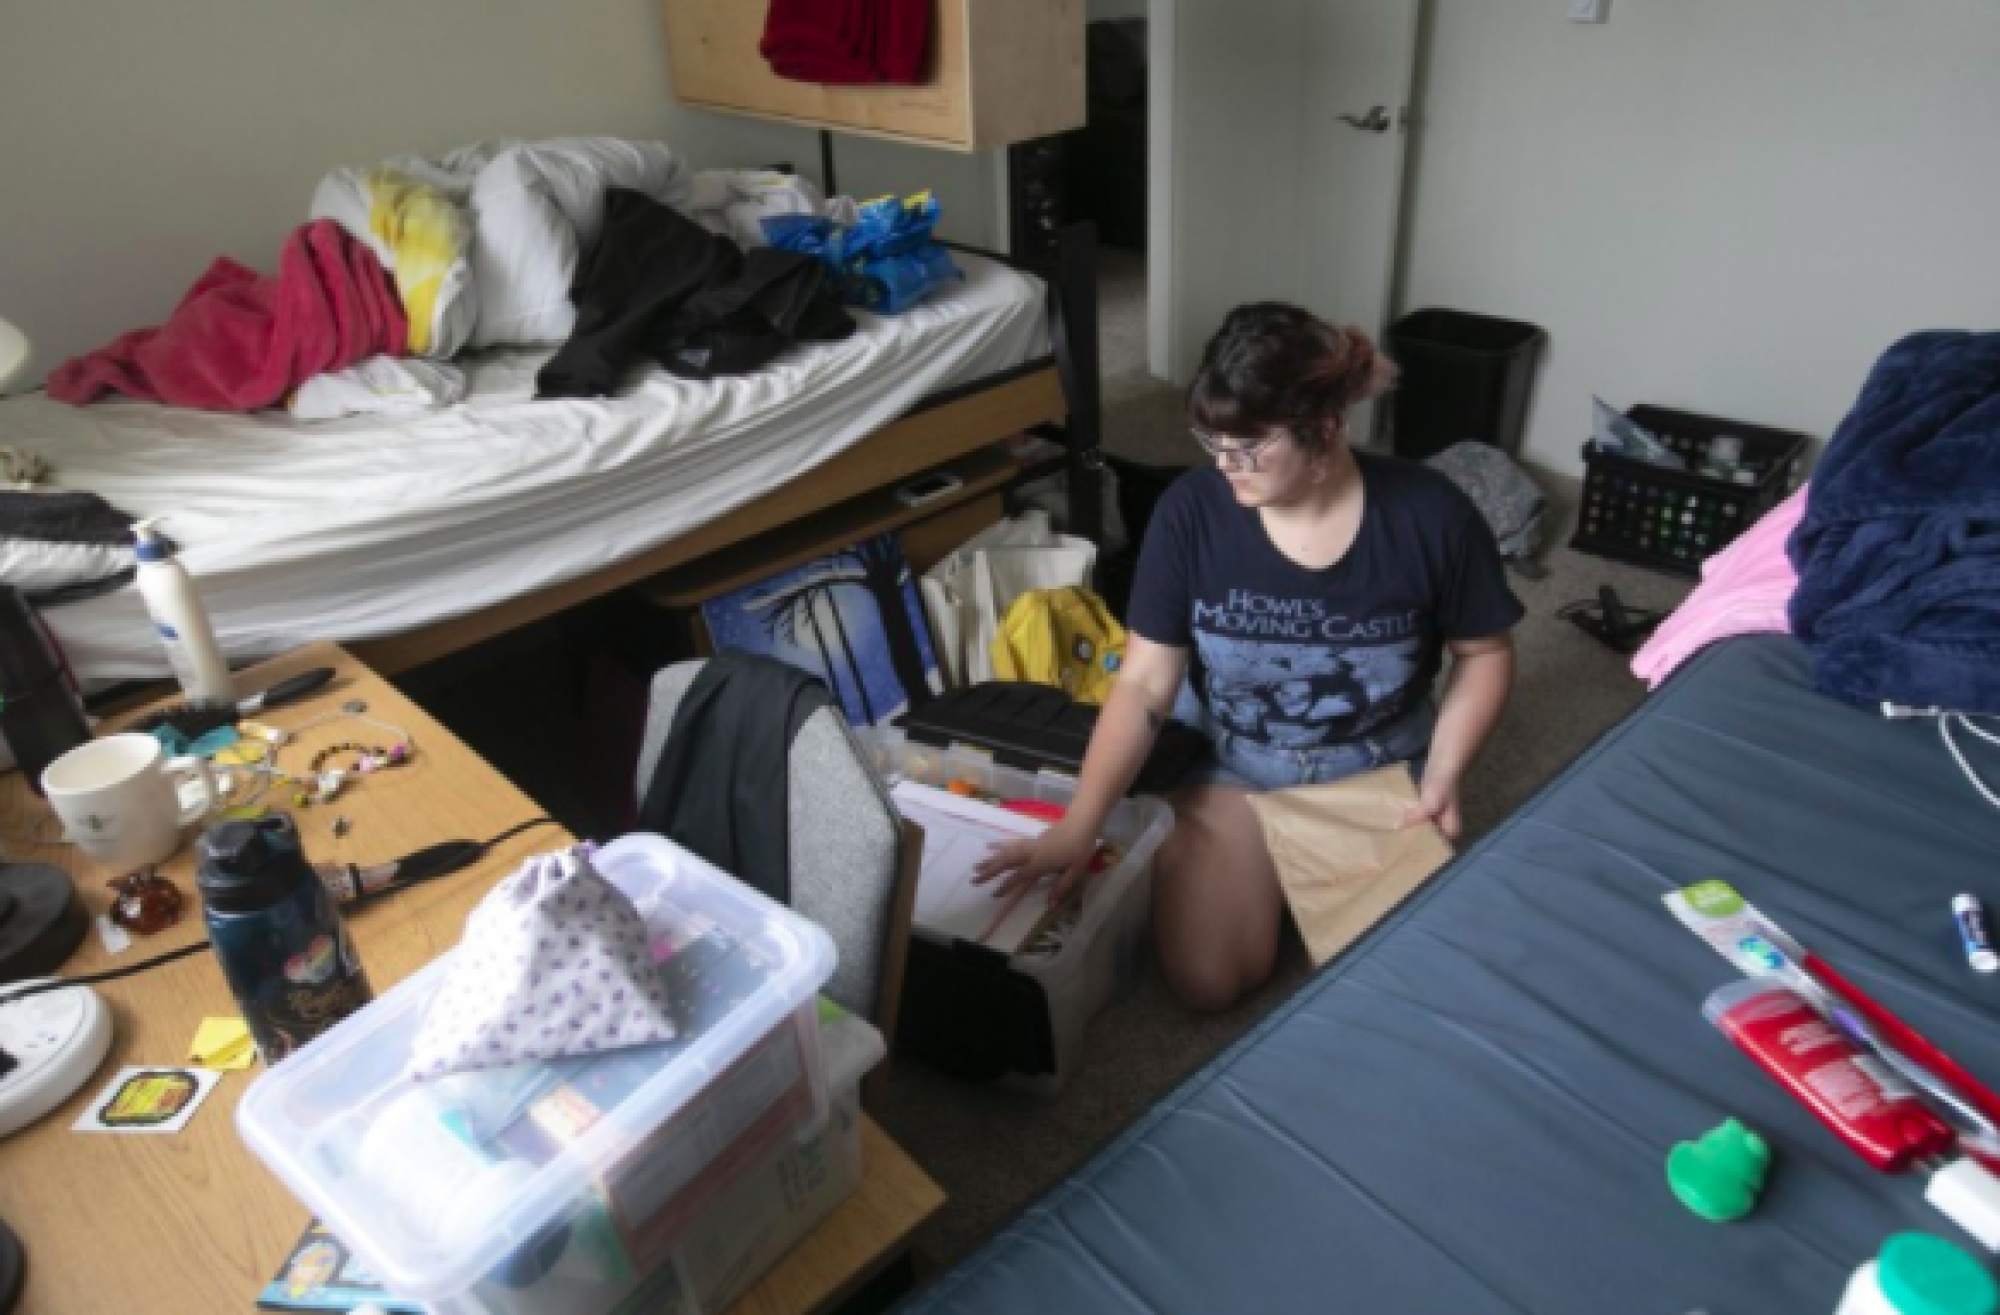 Sophomore Juniper Perkins packed her belongings as she moved out of her dormitory apartment at SDSU on March 18th.